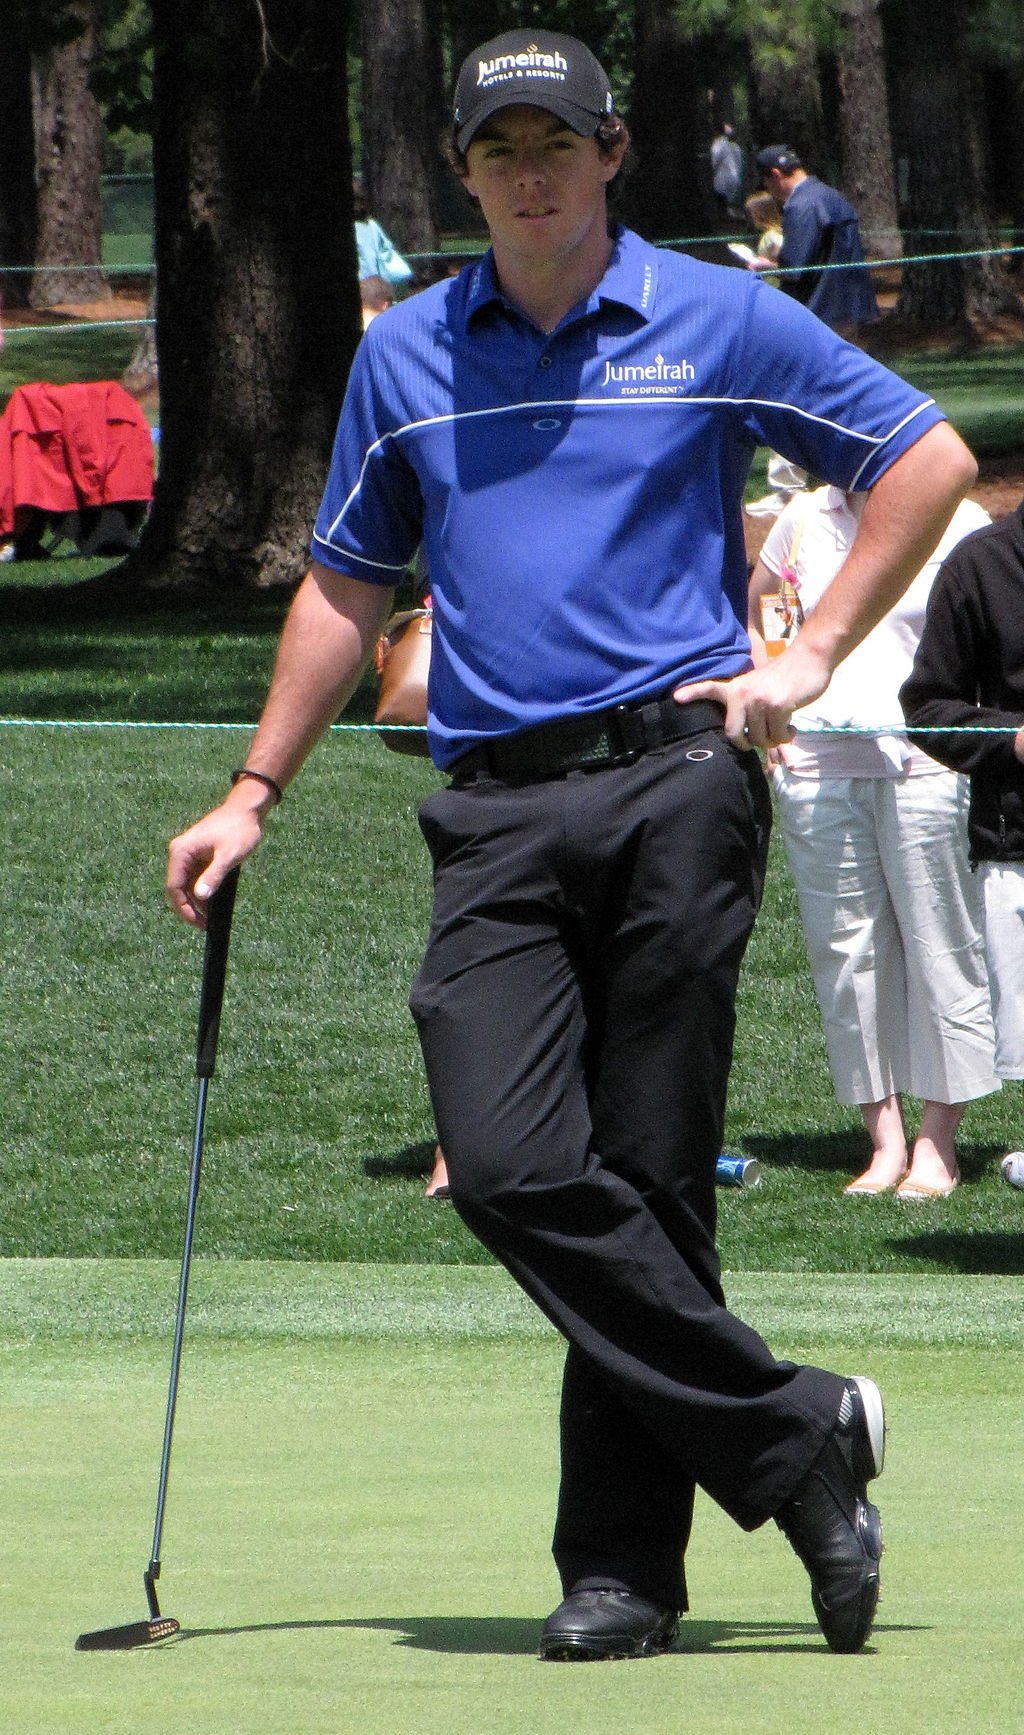 Rory McIlroy at a golf game on May 4, 2011 | Photo: Wikipedia/Ed McDonald/Rory McIlroy/CC BY-SA 2.0